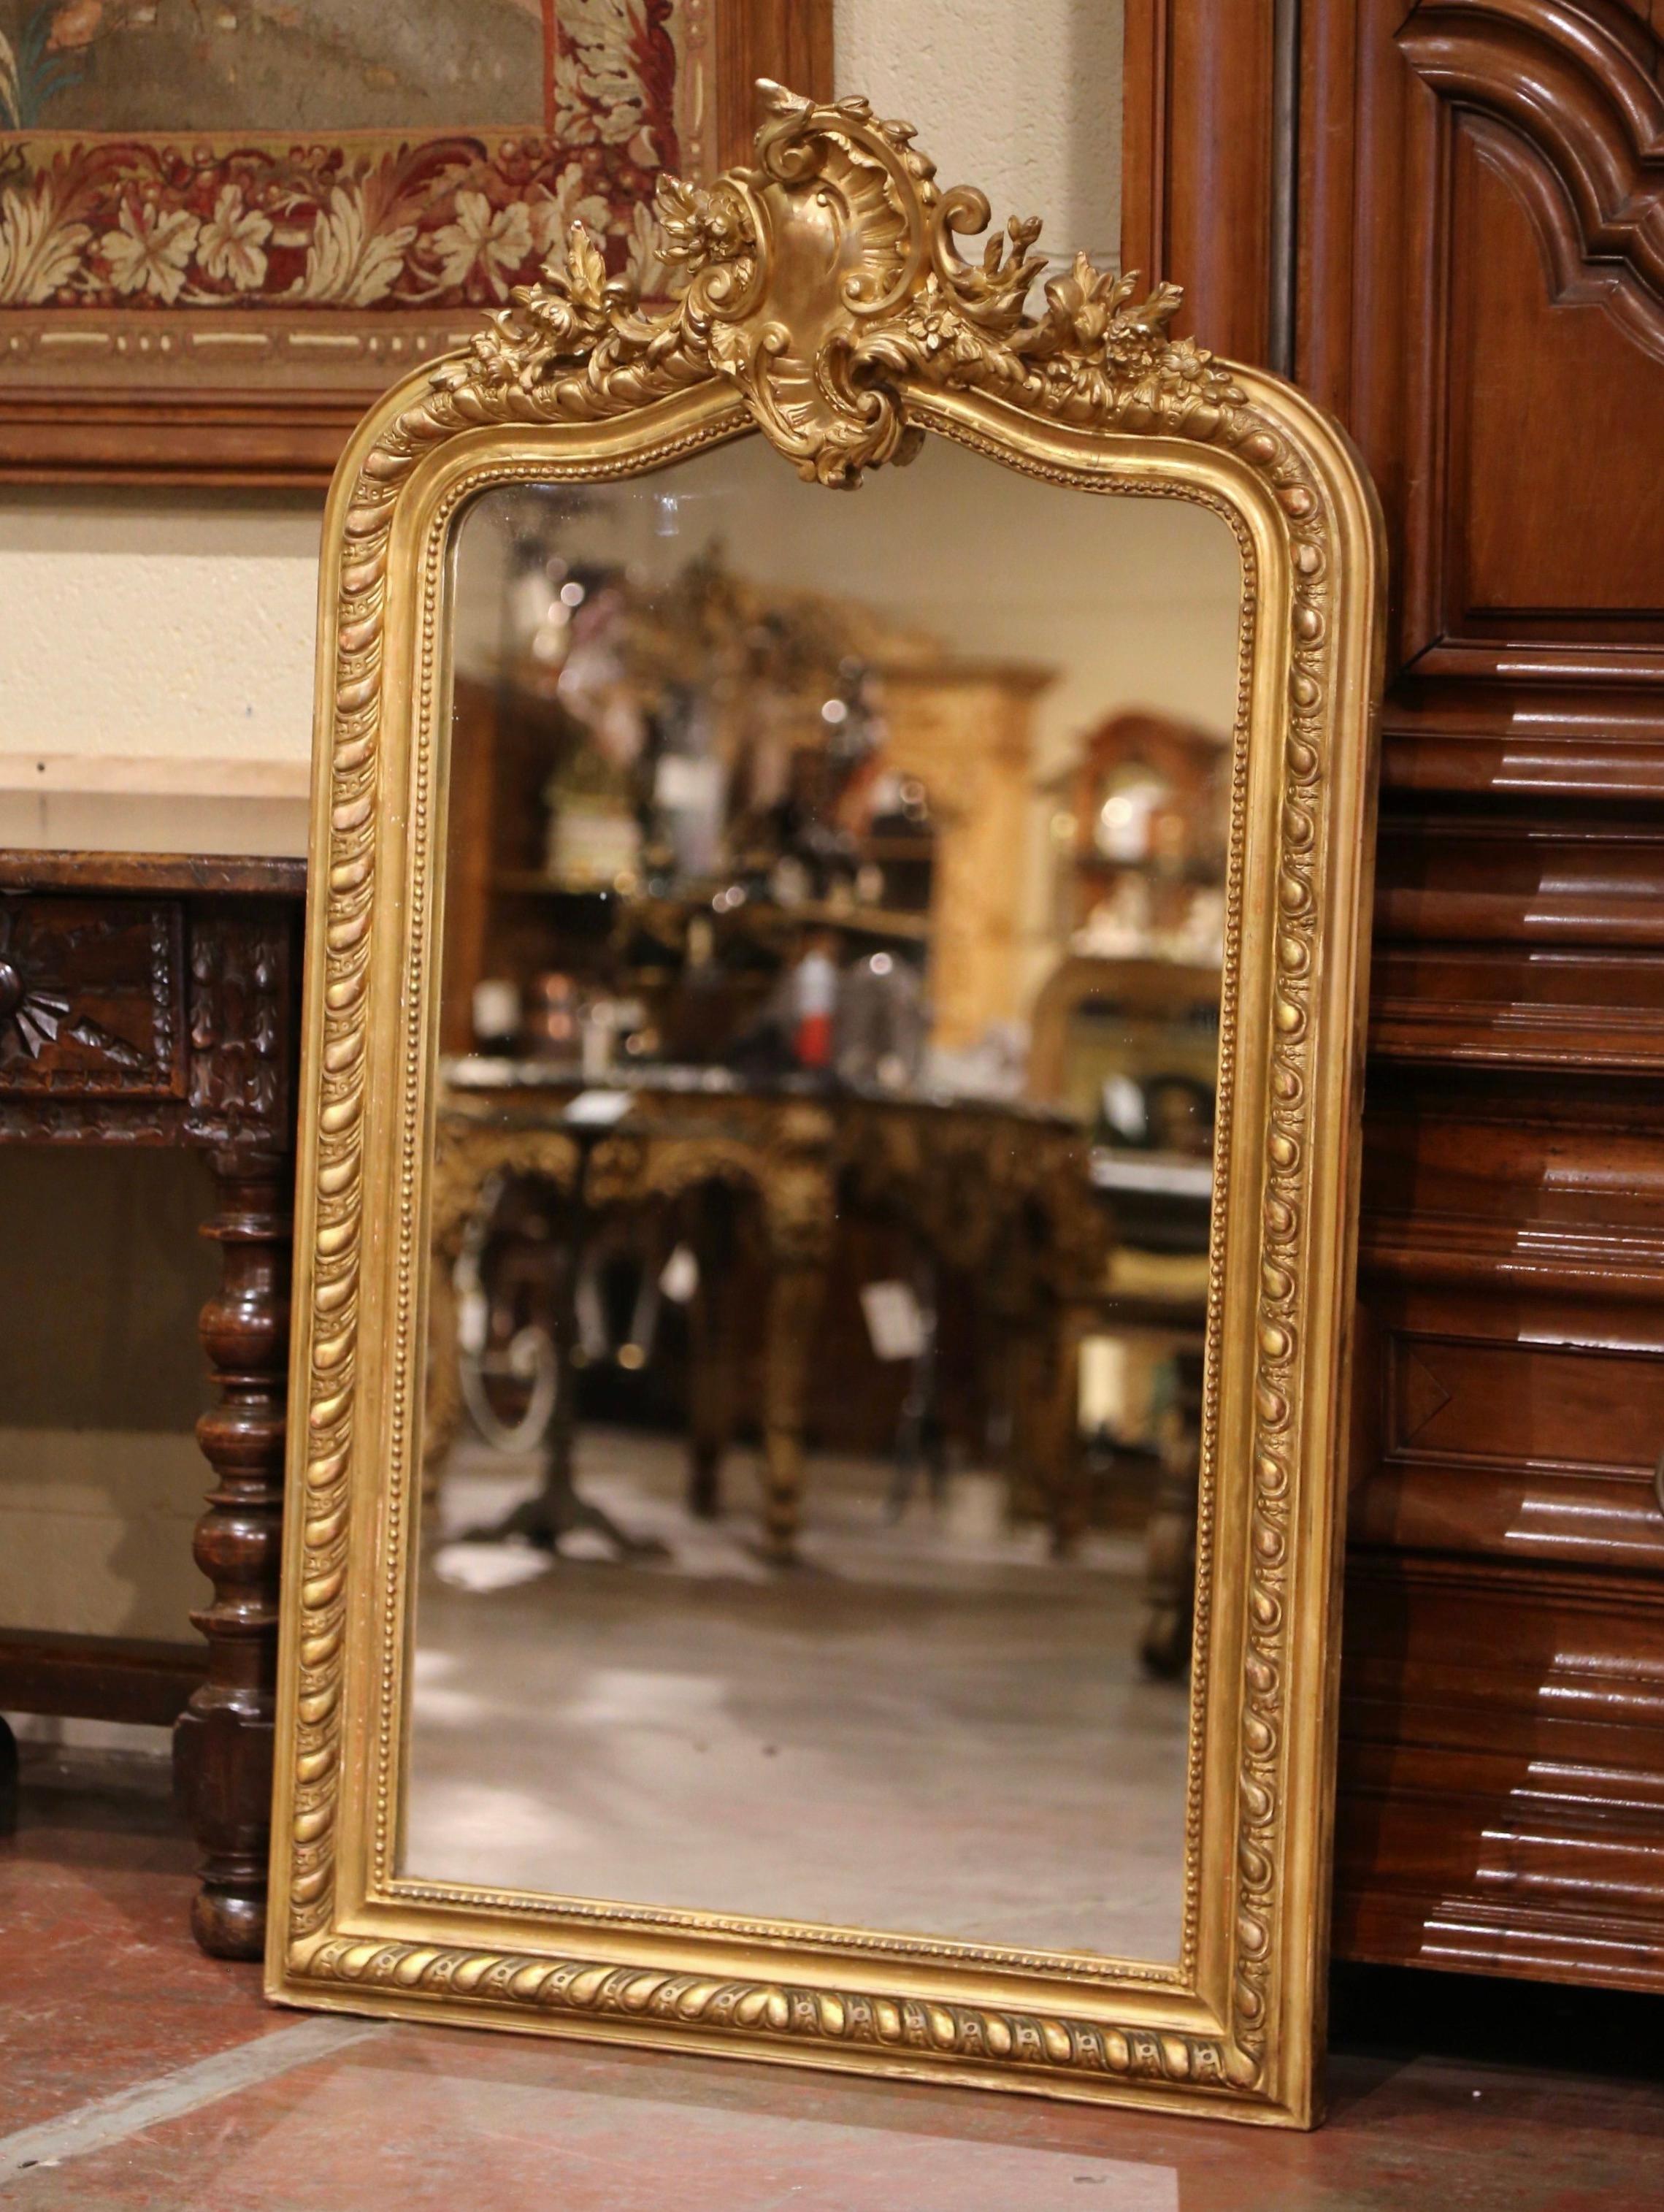 Decorate a powder room or entry with this elegant antique mirror. Crafted in France circa 1870, and curved at the top, the wall mirror is decorated with a hand carved cartouche at the pediment featuring a center shell motif flanked by floral and